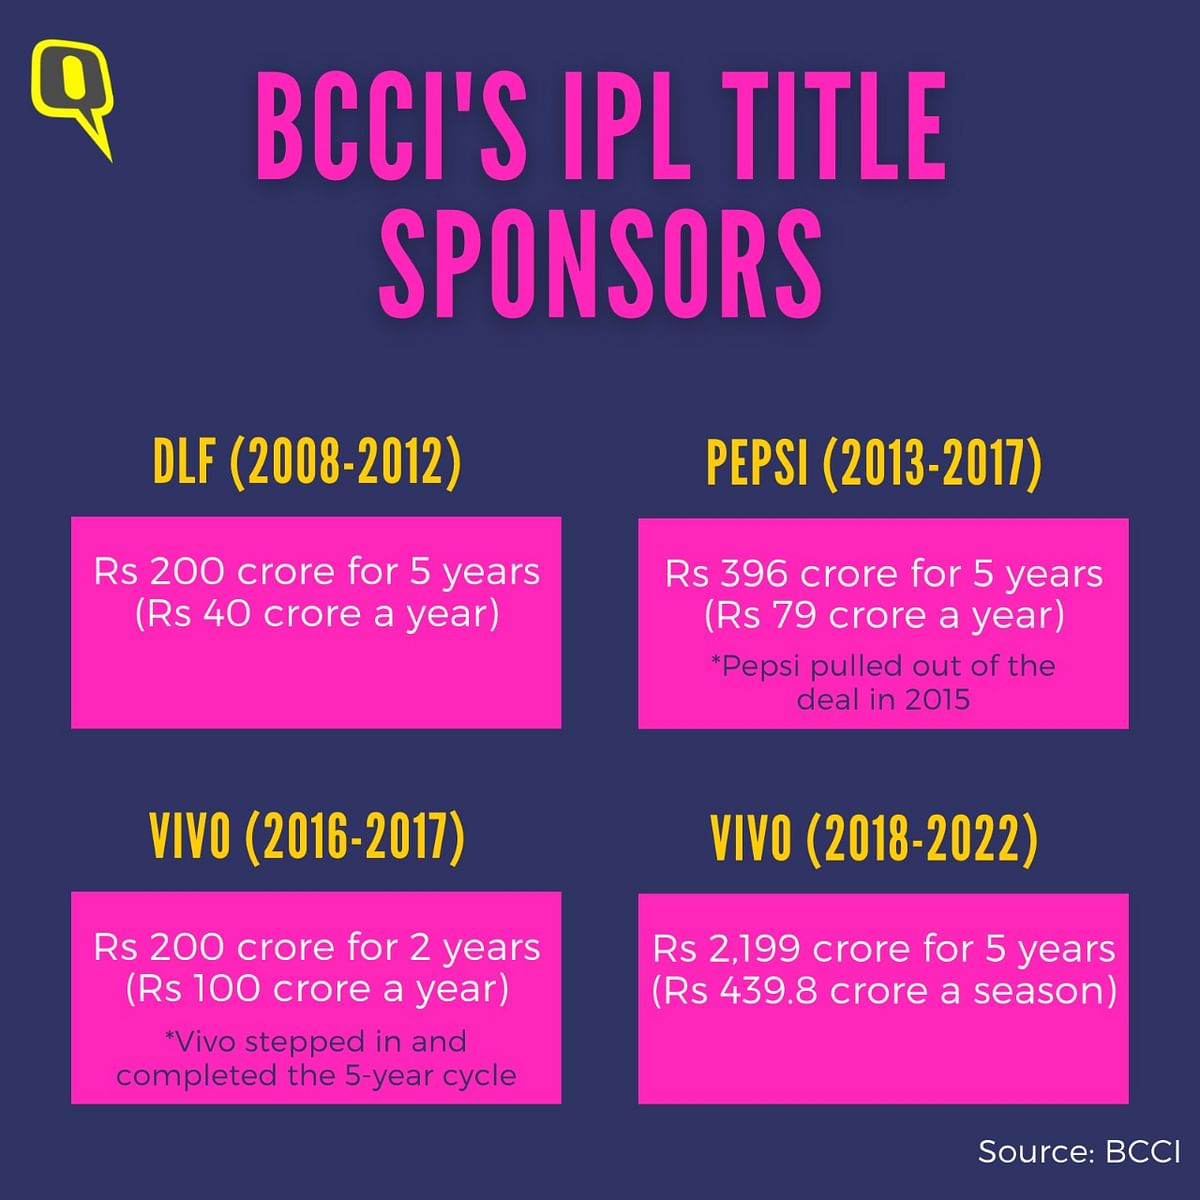 IPL 2020 in happening, despite the pandemic. How is it possible and what step are being taken to keep everyone safe?